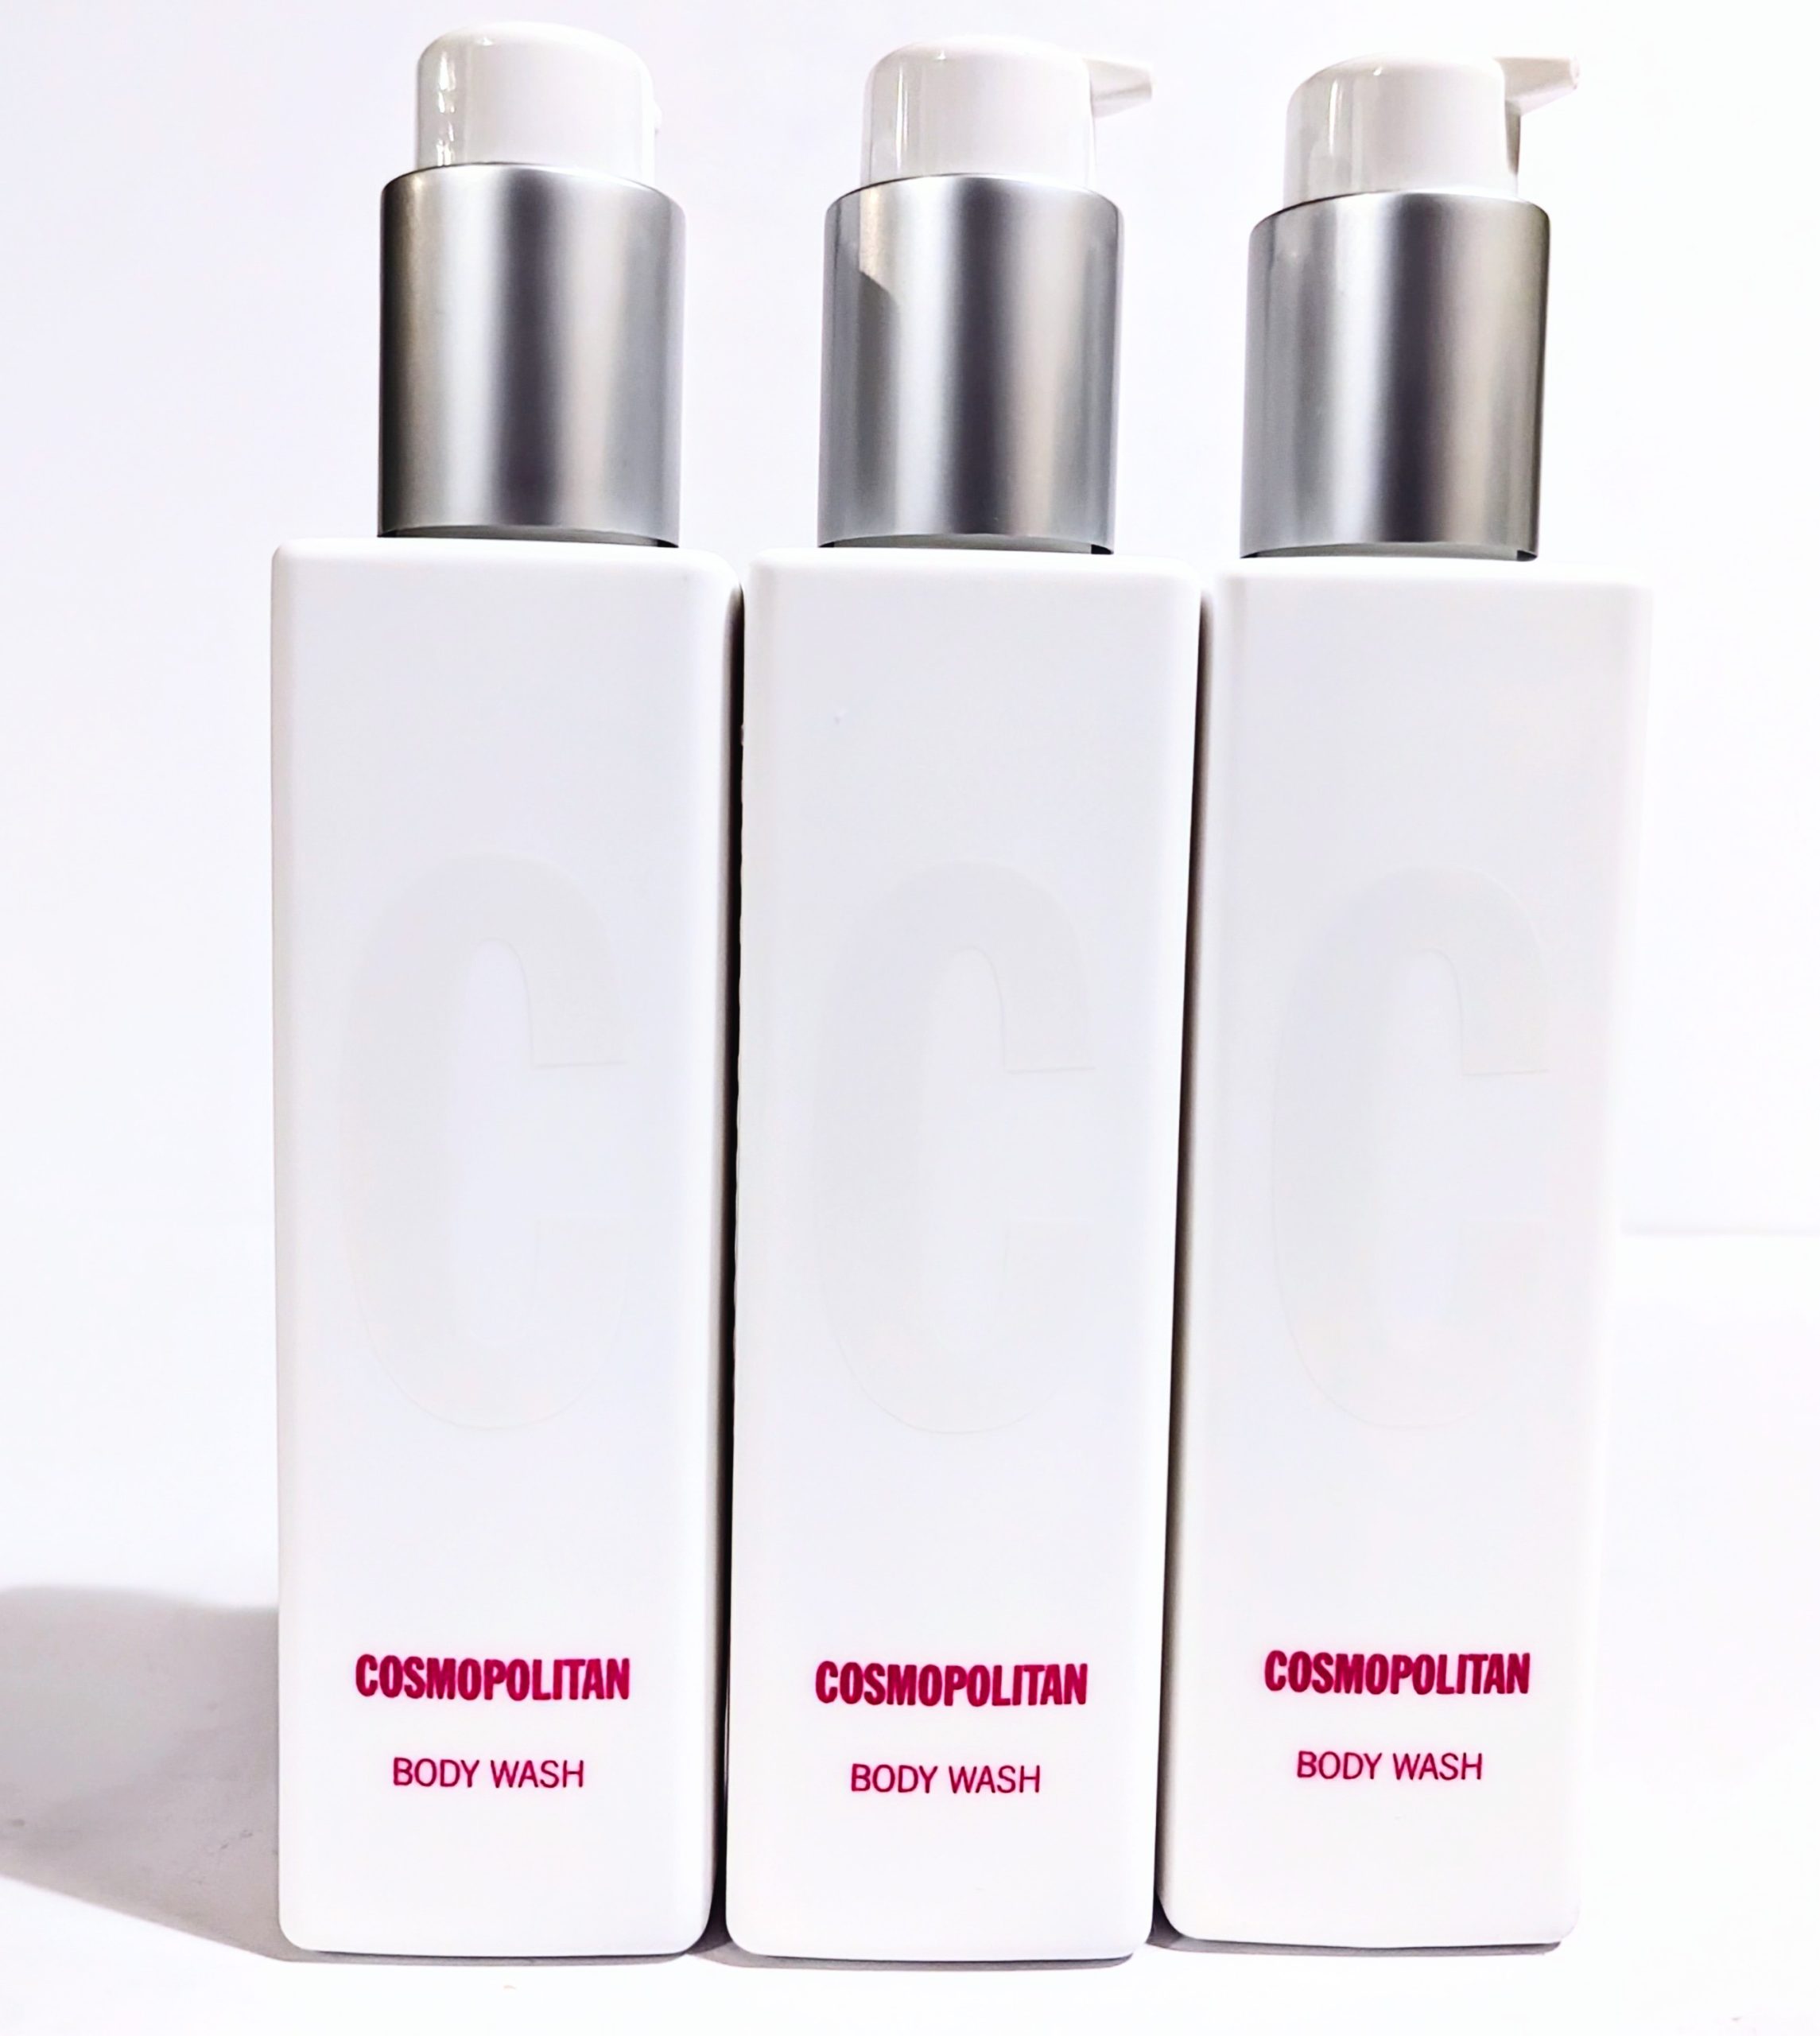 Three white bottles of Cosmopolitan Body Wash with pump dispensers, arranged side by side against a white background.